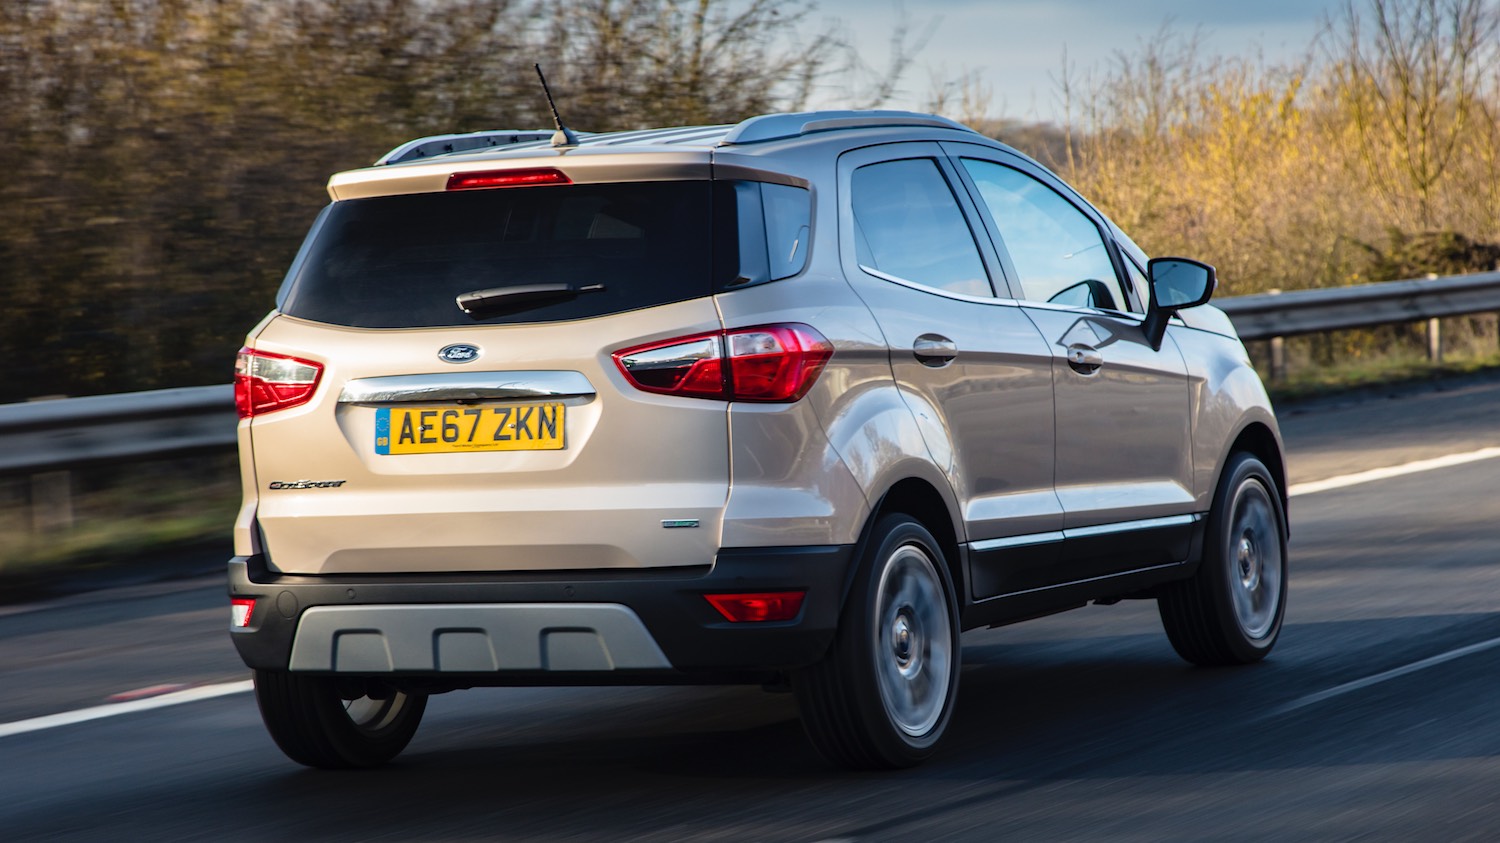 Neil Lyndon reviews the latest Ford EcoSport Titanium for Drive 12